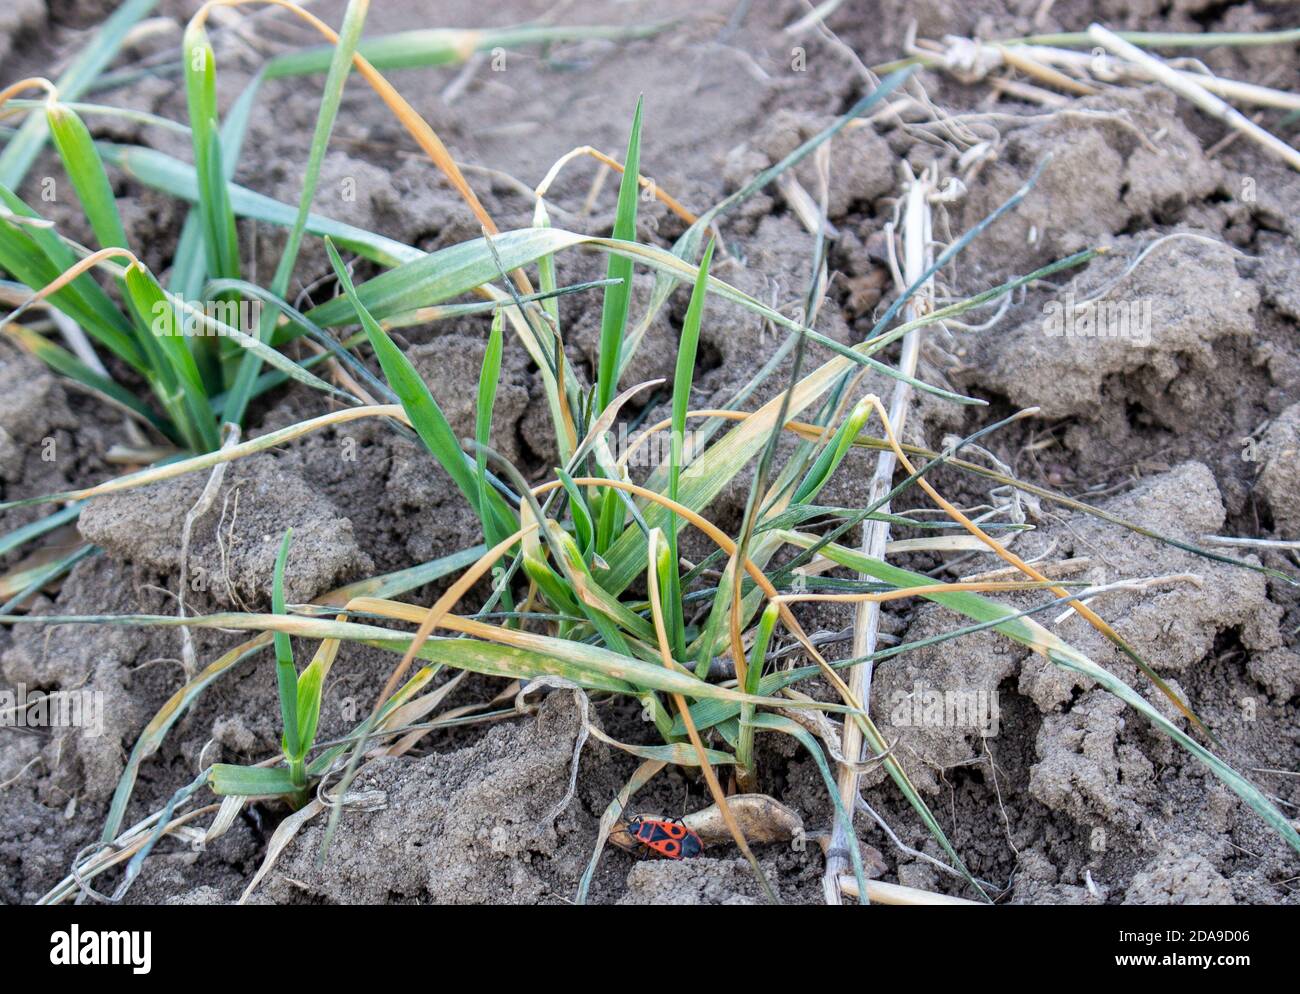 Depleted winter wheat leaves from adverse weather conditions, spring frosts and lack of soil moisture. Stock Photo